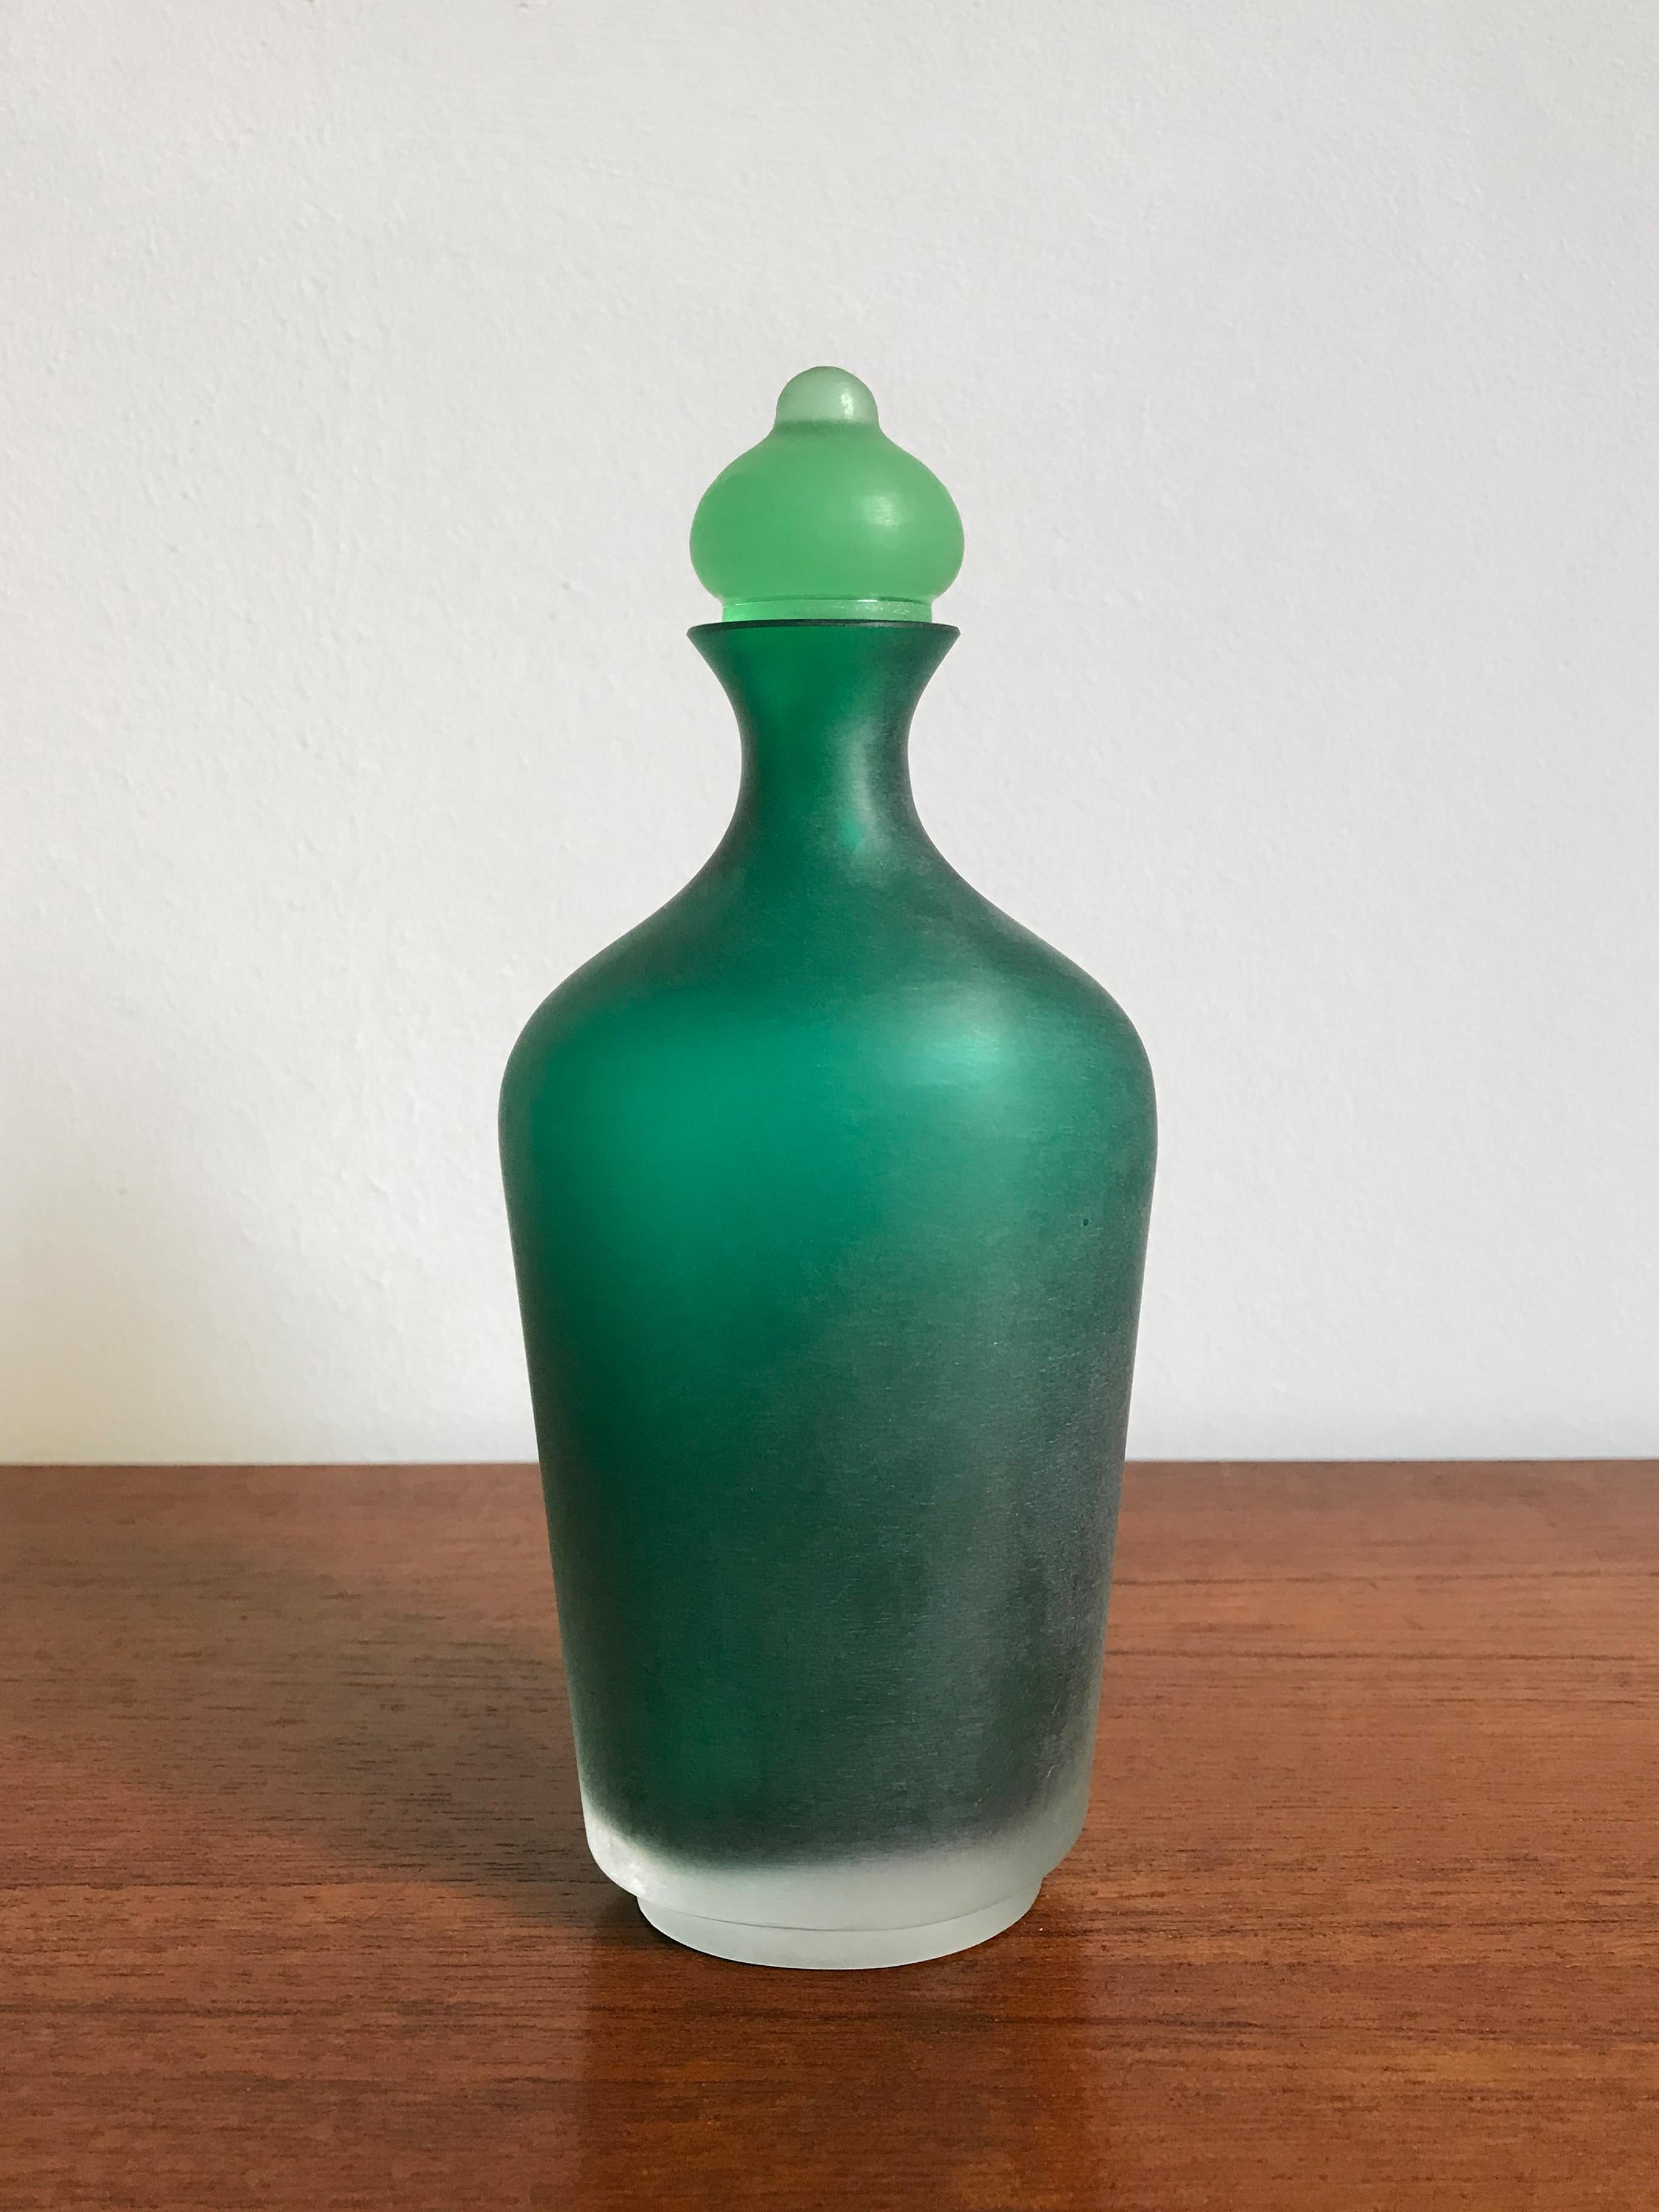 Amazing and fabulous very rare Italian handmade and blown bottle in light green color glass with stopper, from the “Velati” series designed and produced by Venini Murano in 1996.

Original Venini Murano label made in Italy and engraved by the